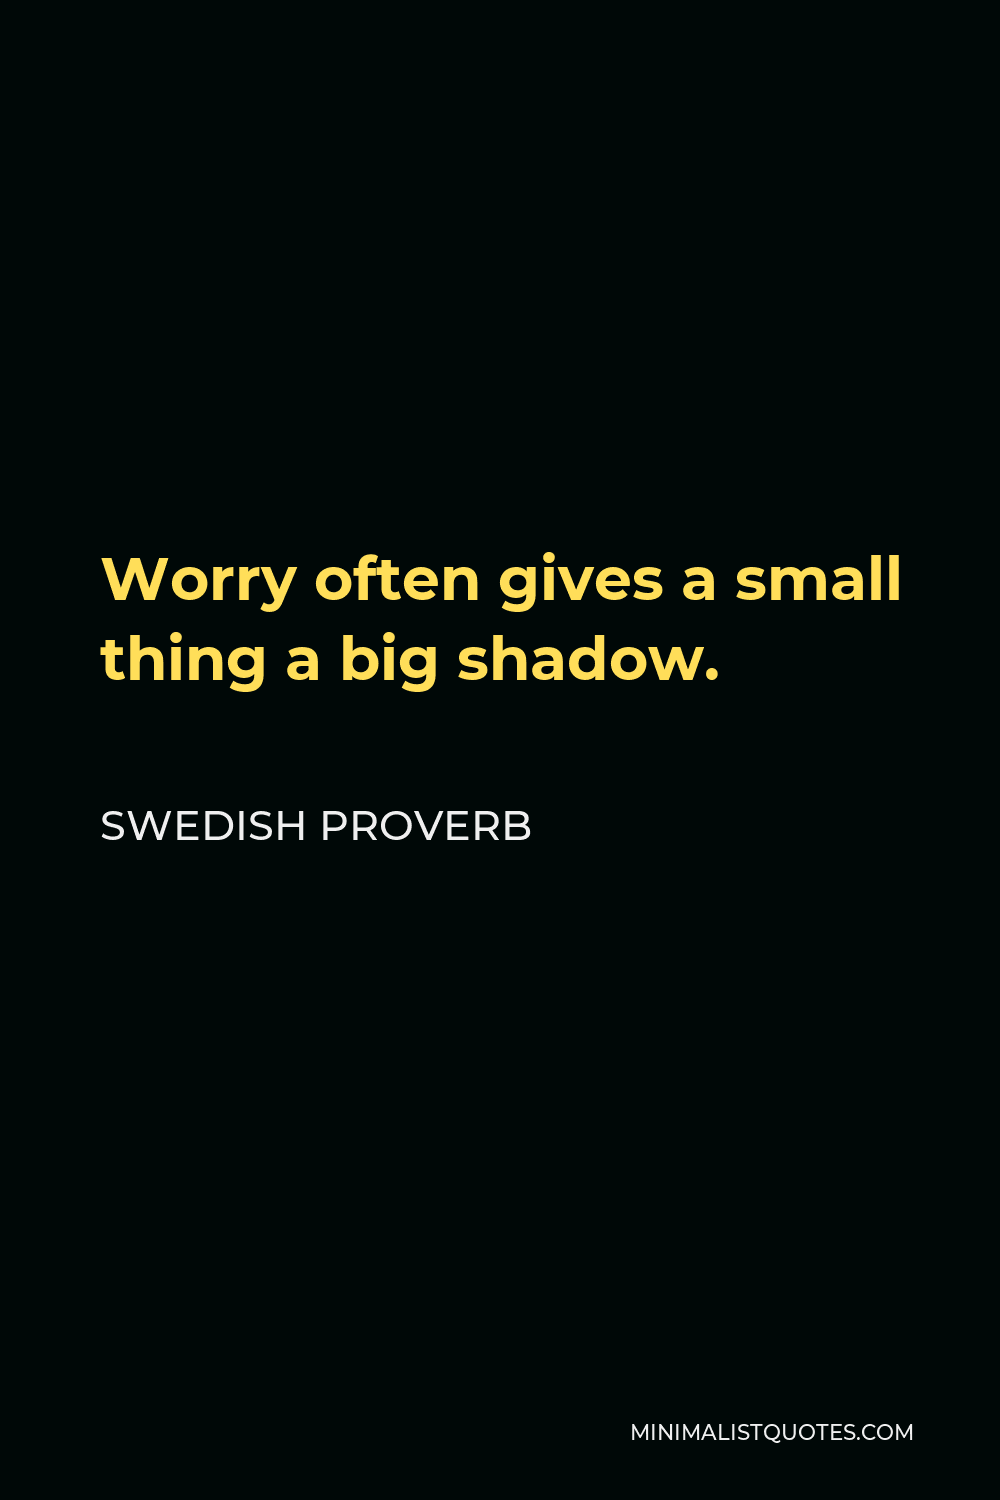 Swedish Proverb Quote - Worry often gives a small thing a big shadow.